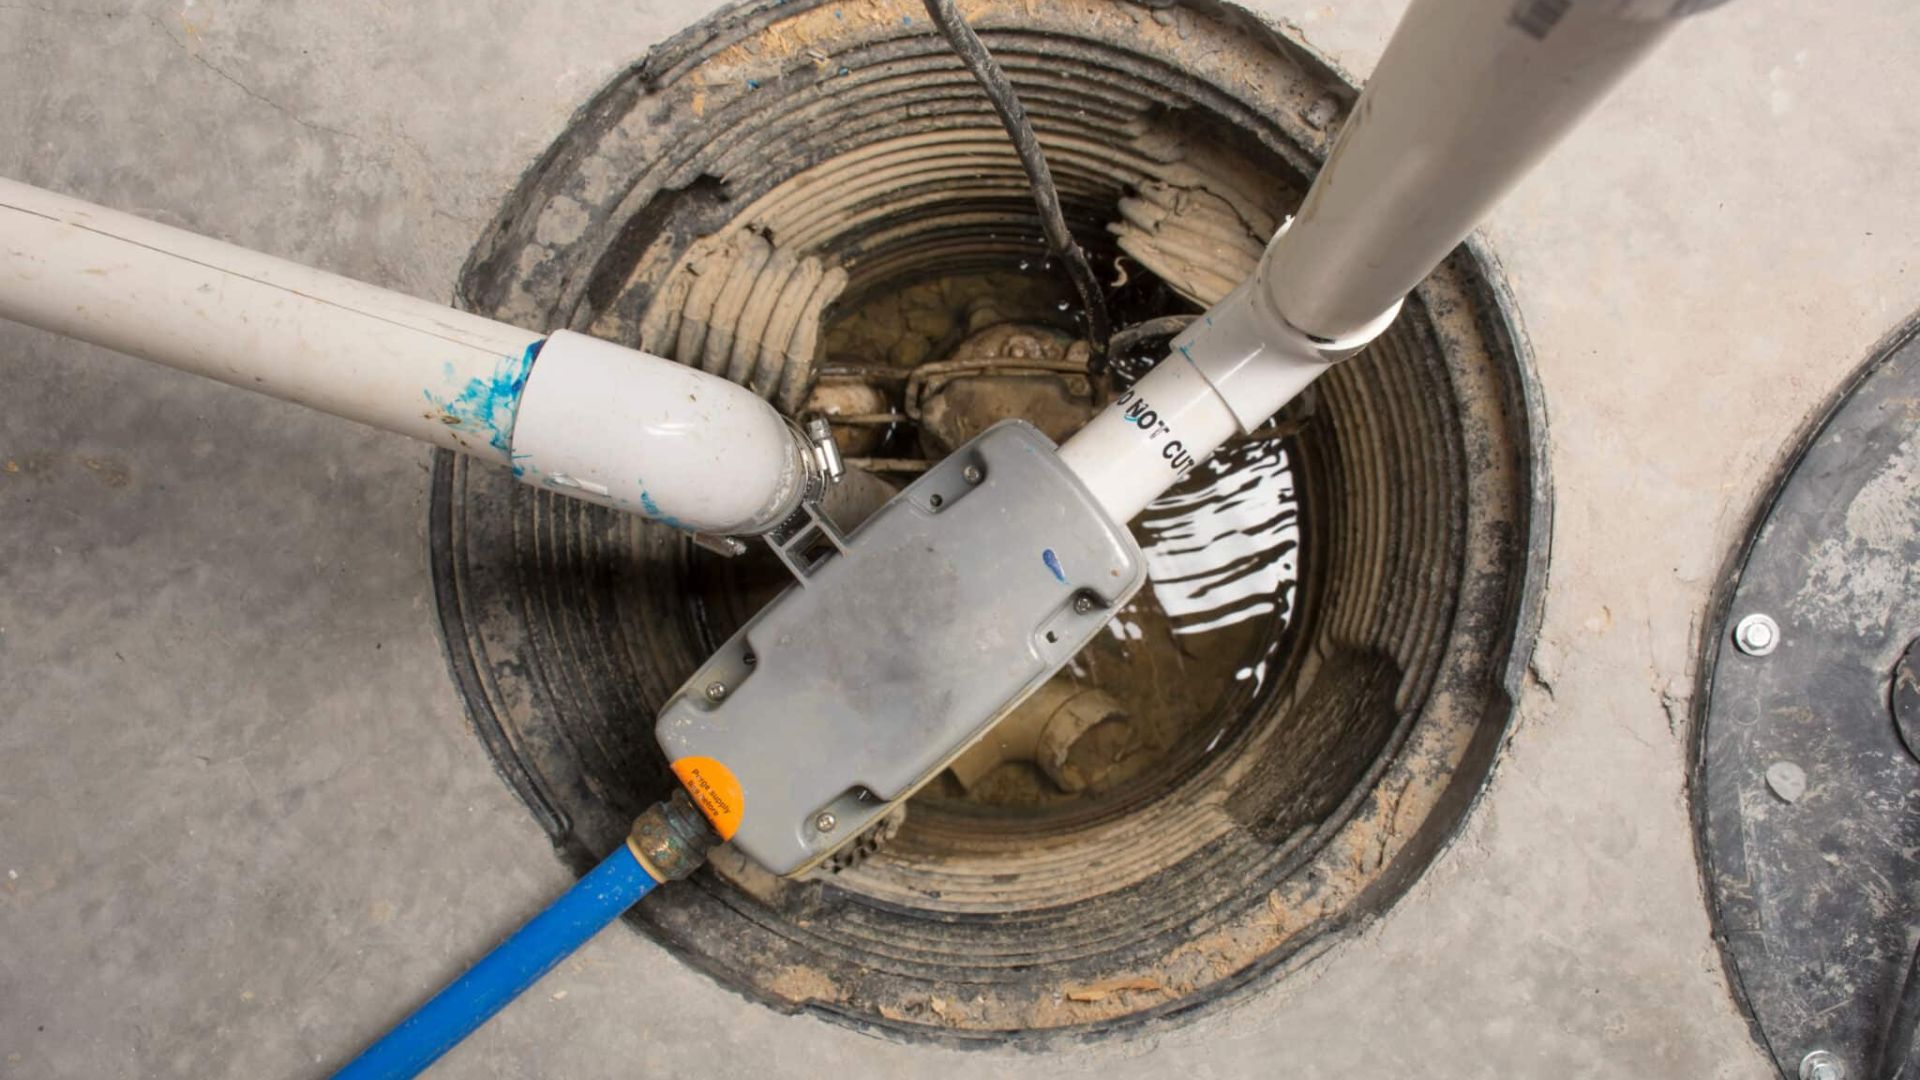 Reach out to CAN Plumbing and Drainage for any requirements related to your sump pump.